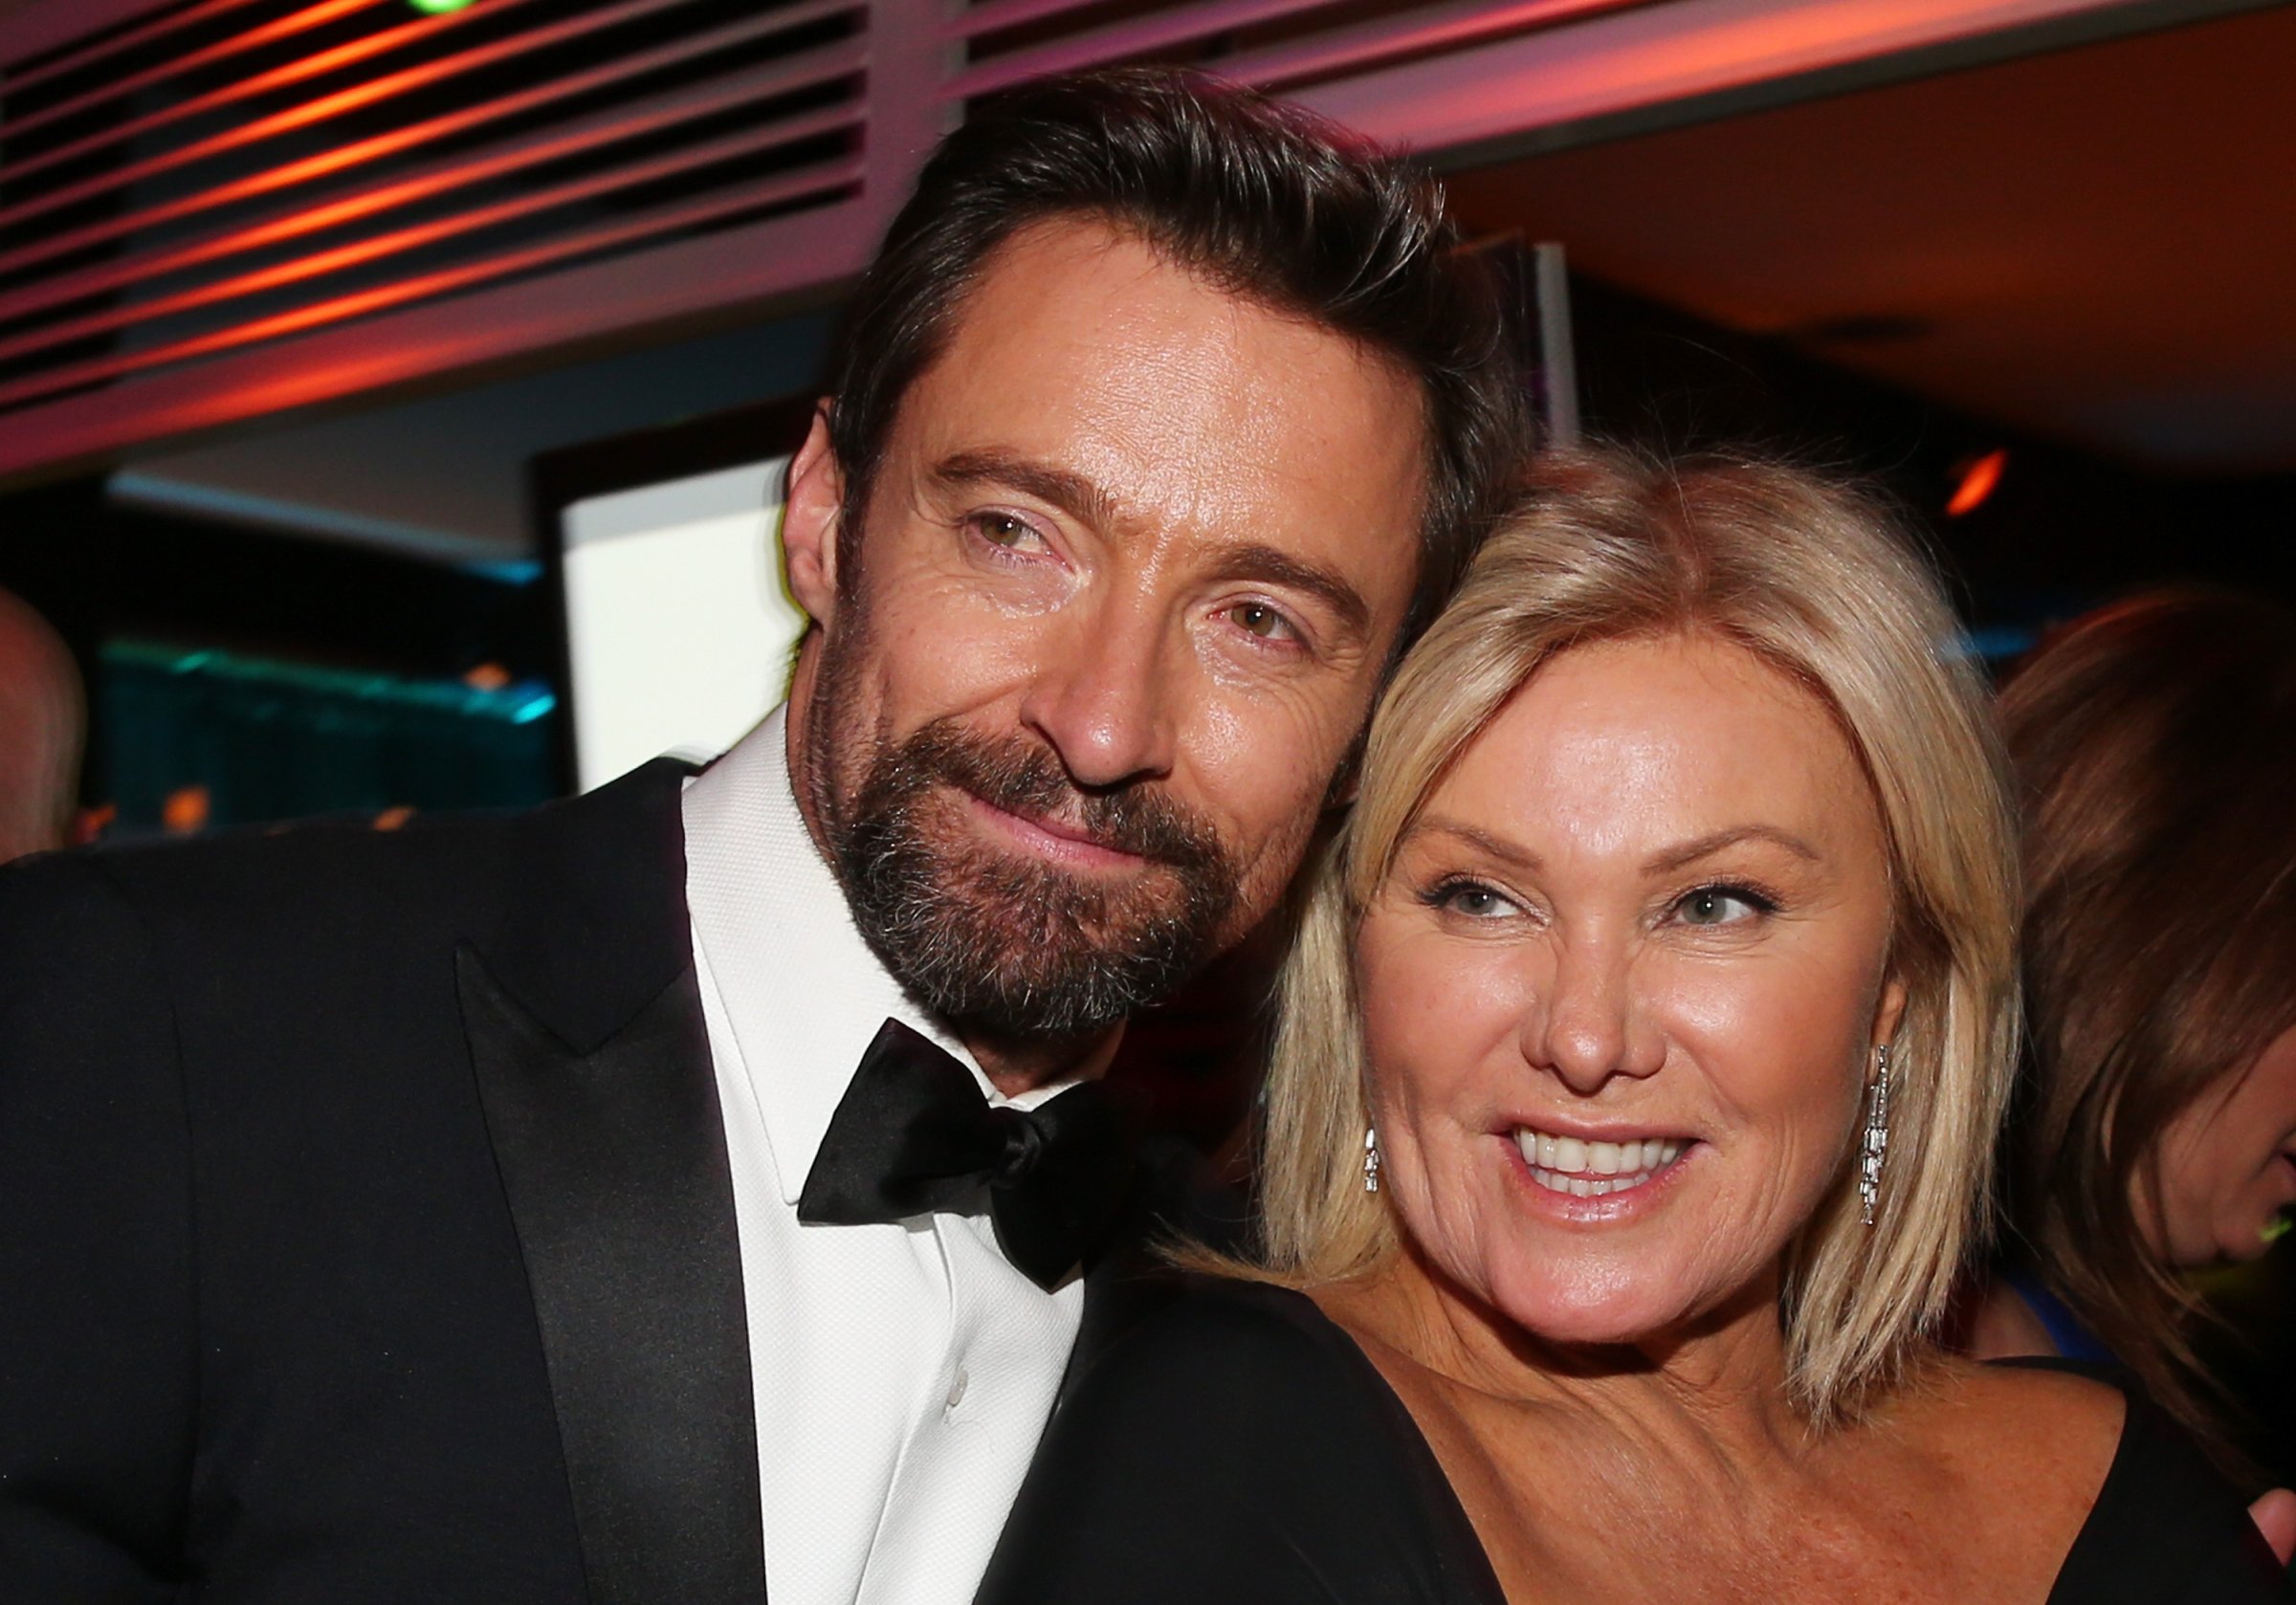 Hugh Jackman and Deborra-Lee Furness at NBC Universal's Golden Globes Post-Party on January 13, 2013.